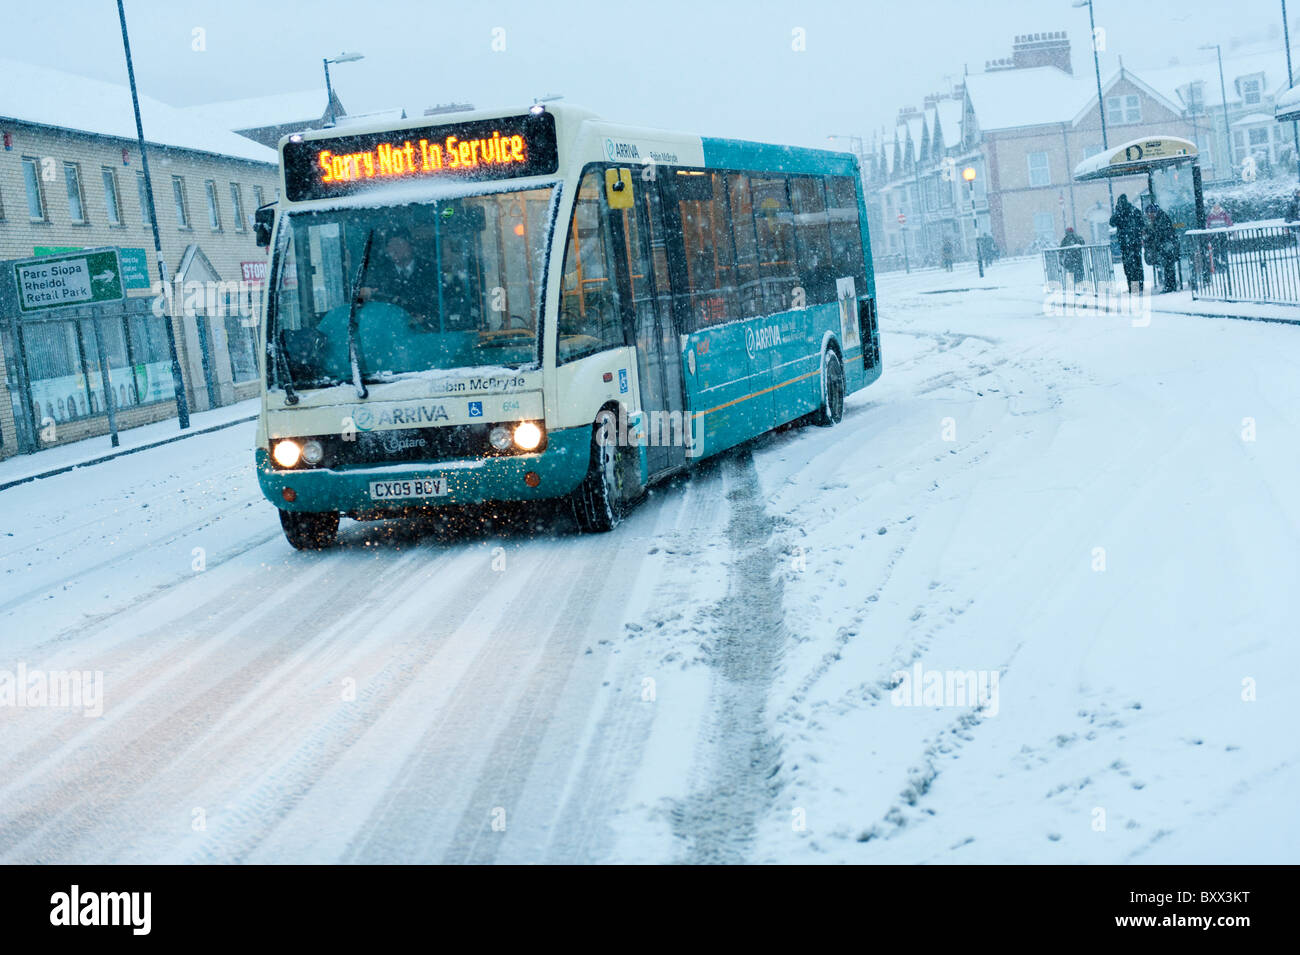 Arriva Wales bus not in service because of the snow, Aberystwyth Wales UK December 2010 Stock Photo